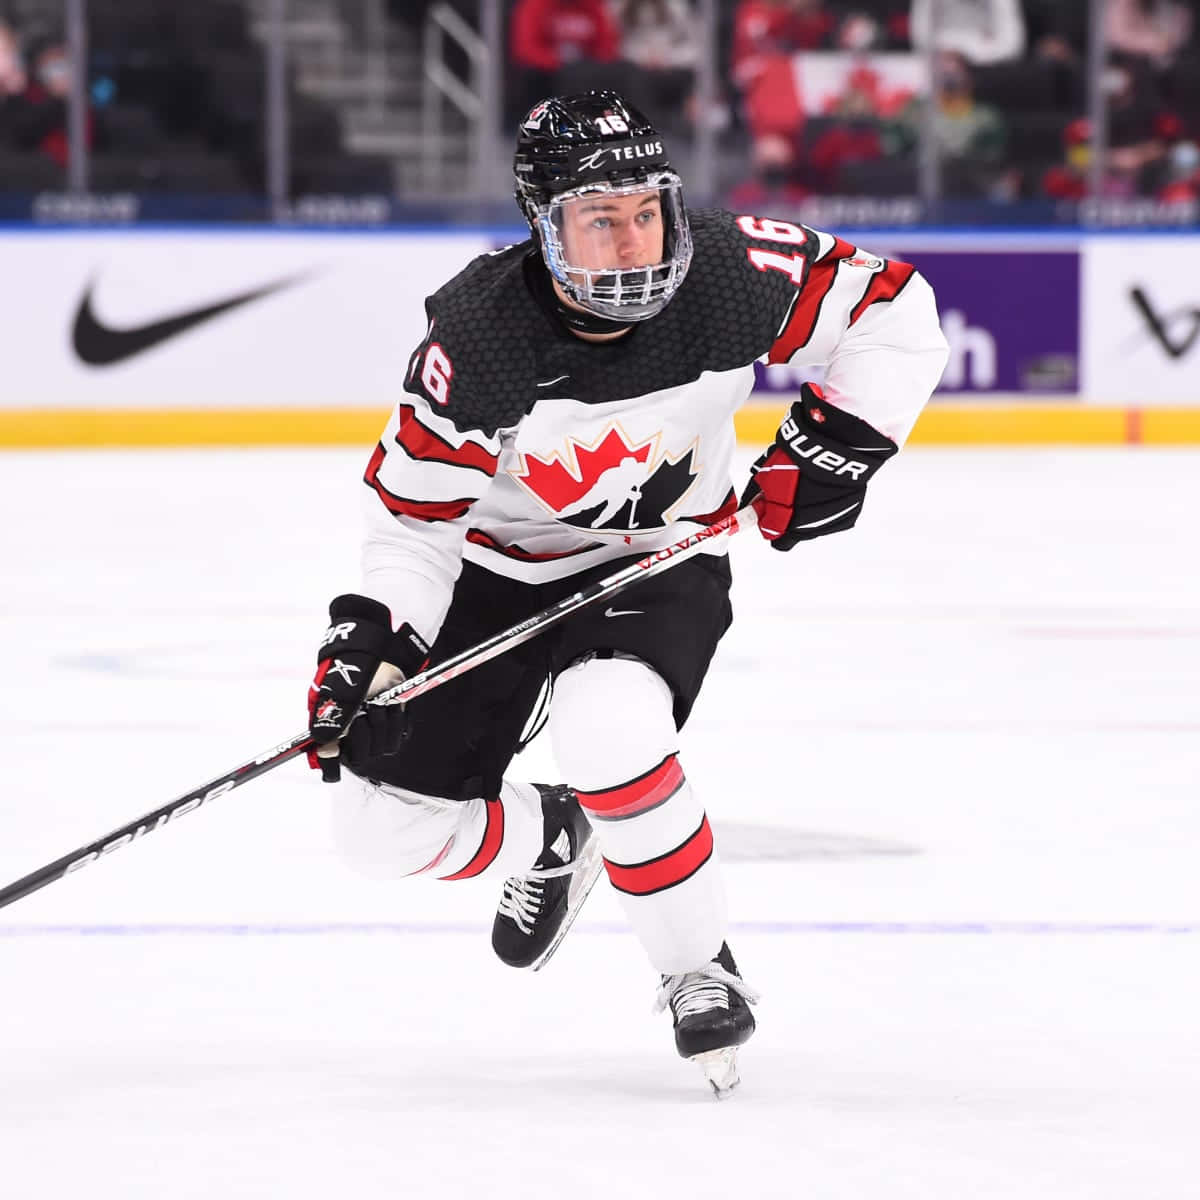 Canadian Hockey Player In Action Wallpaper